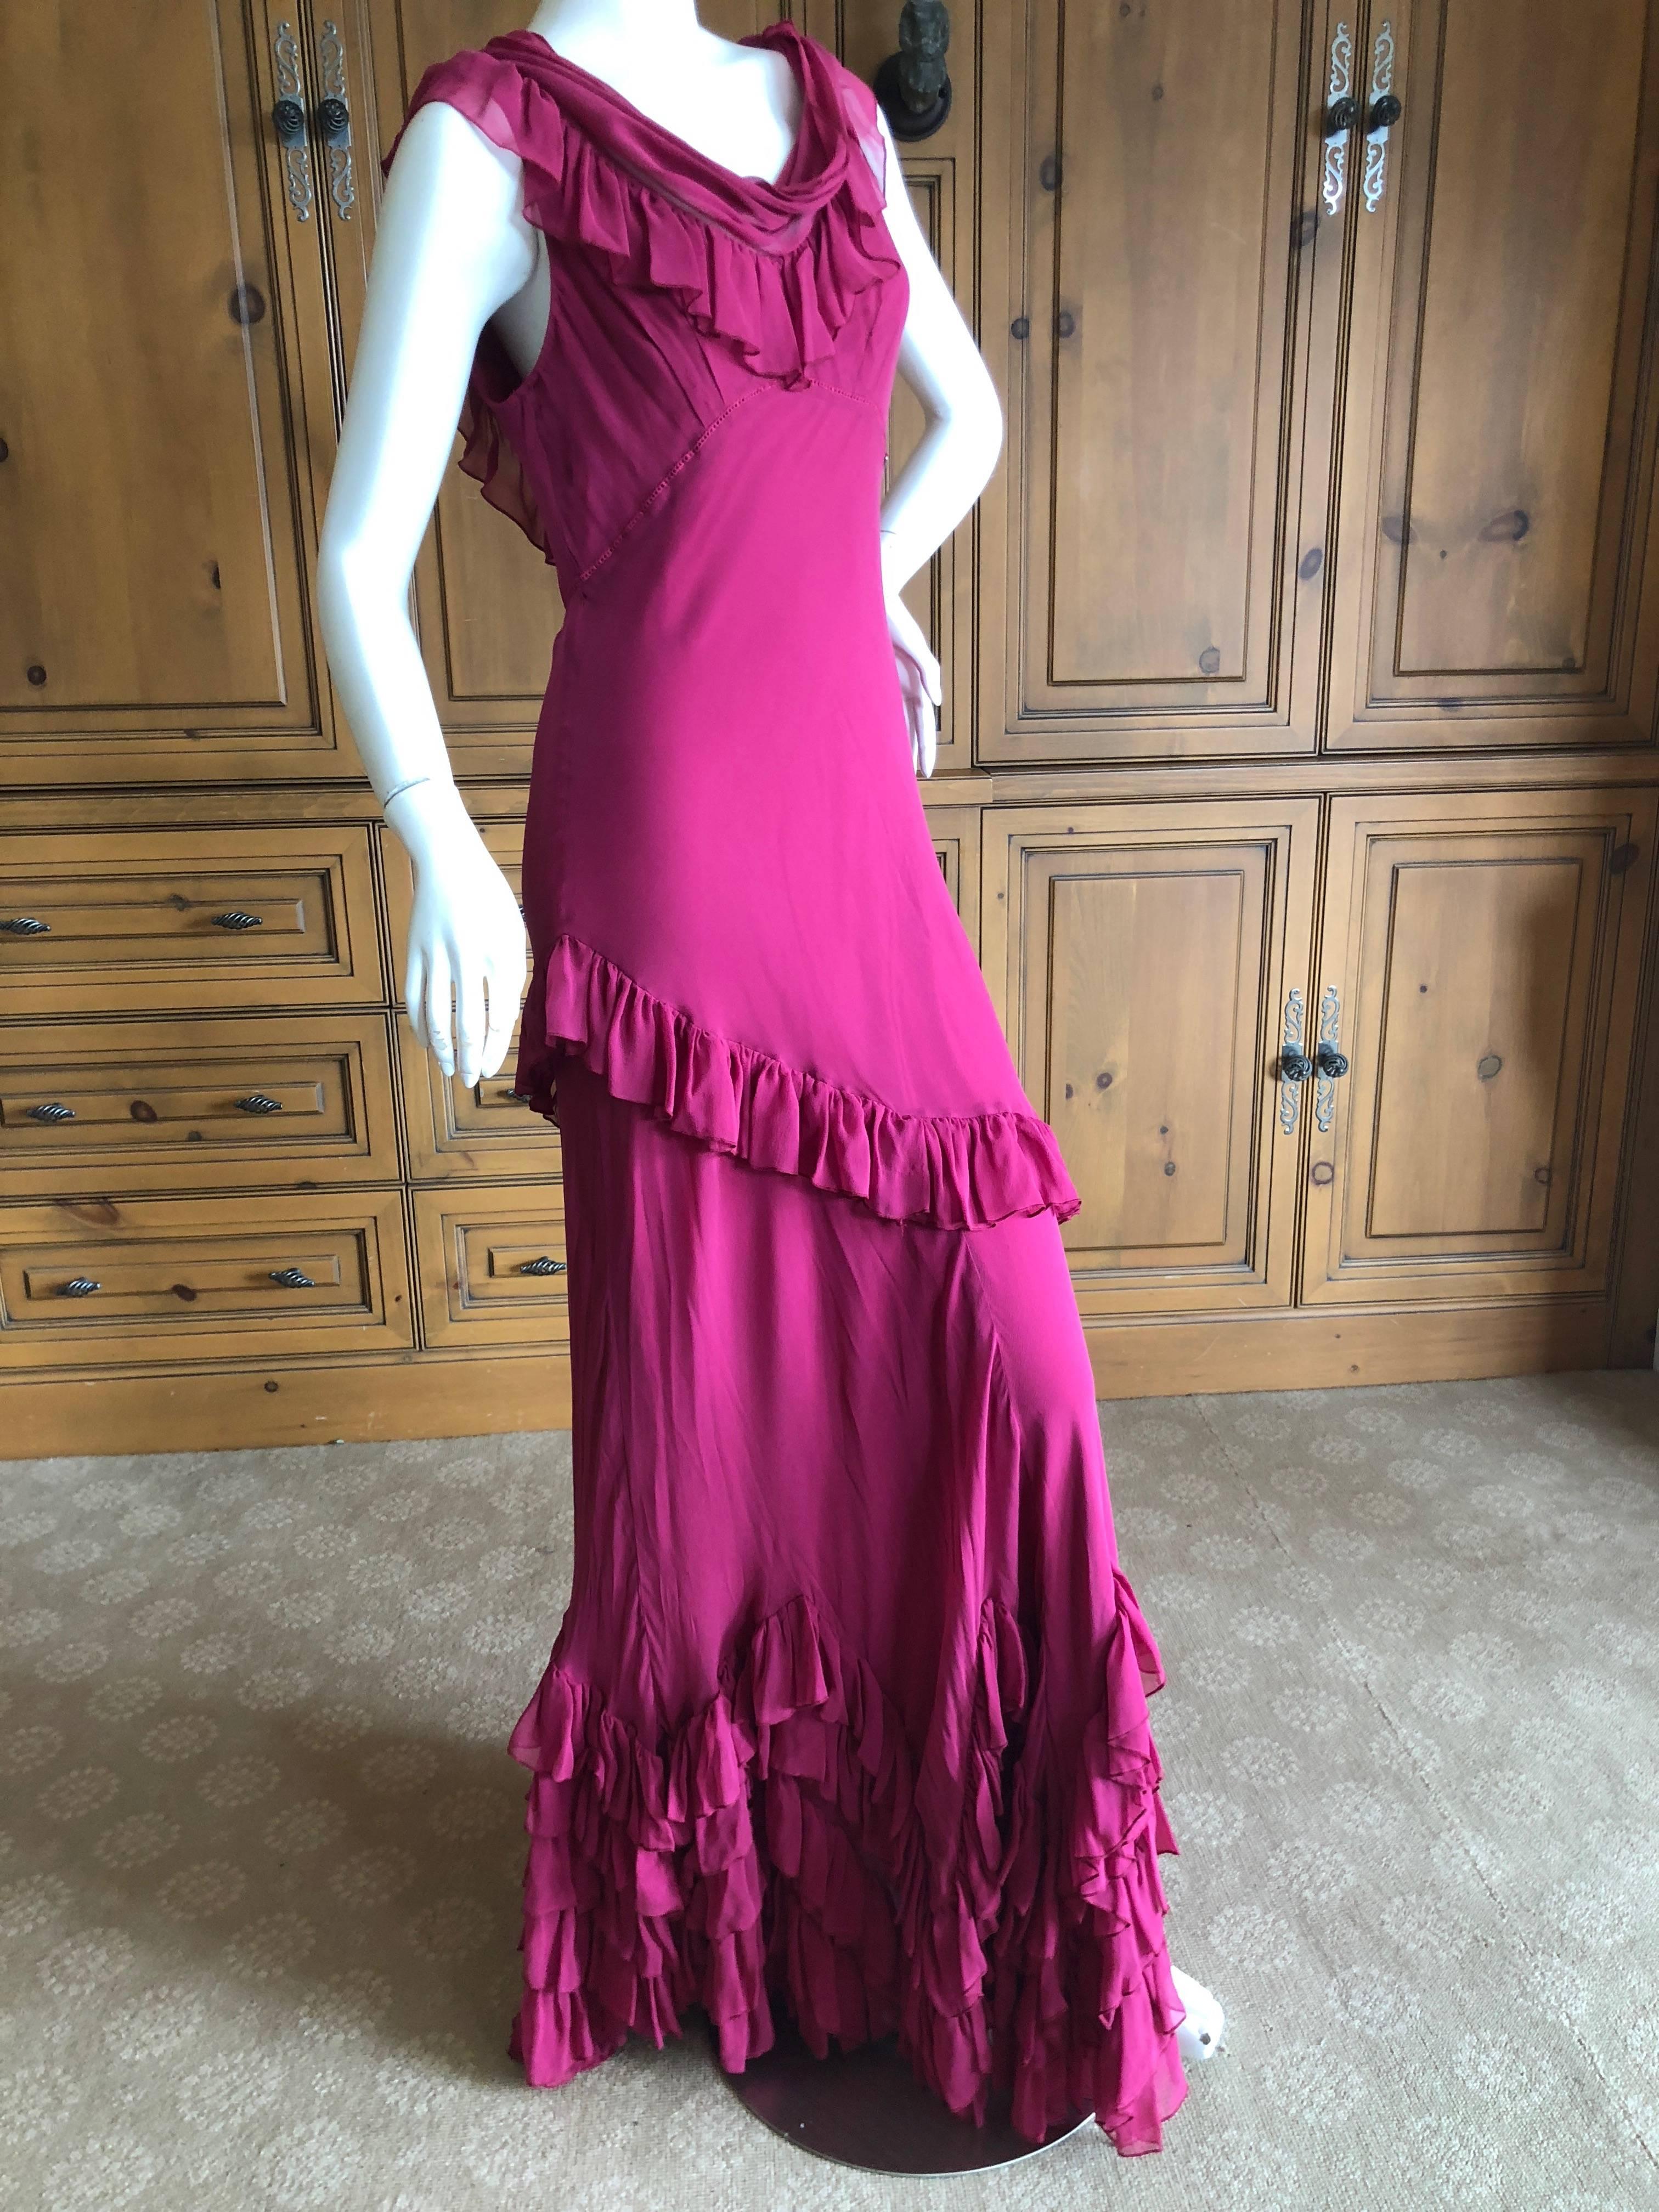 John Galliano Raspberry Sheer Vintage Silk Ruffled Evening Dress with Cowl Back  For Sale 1